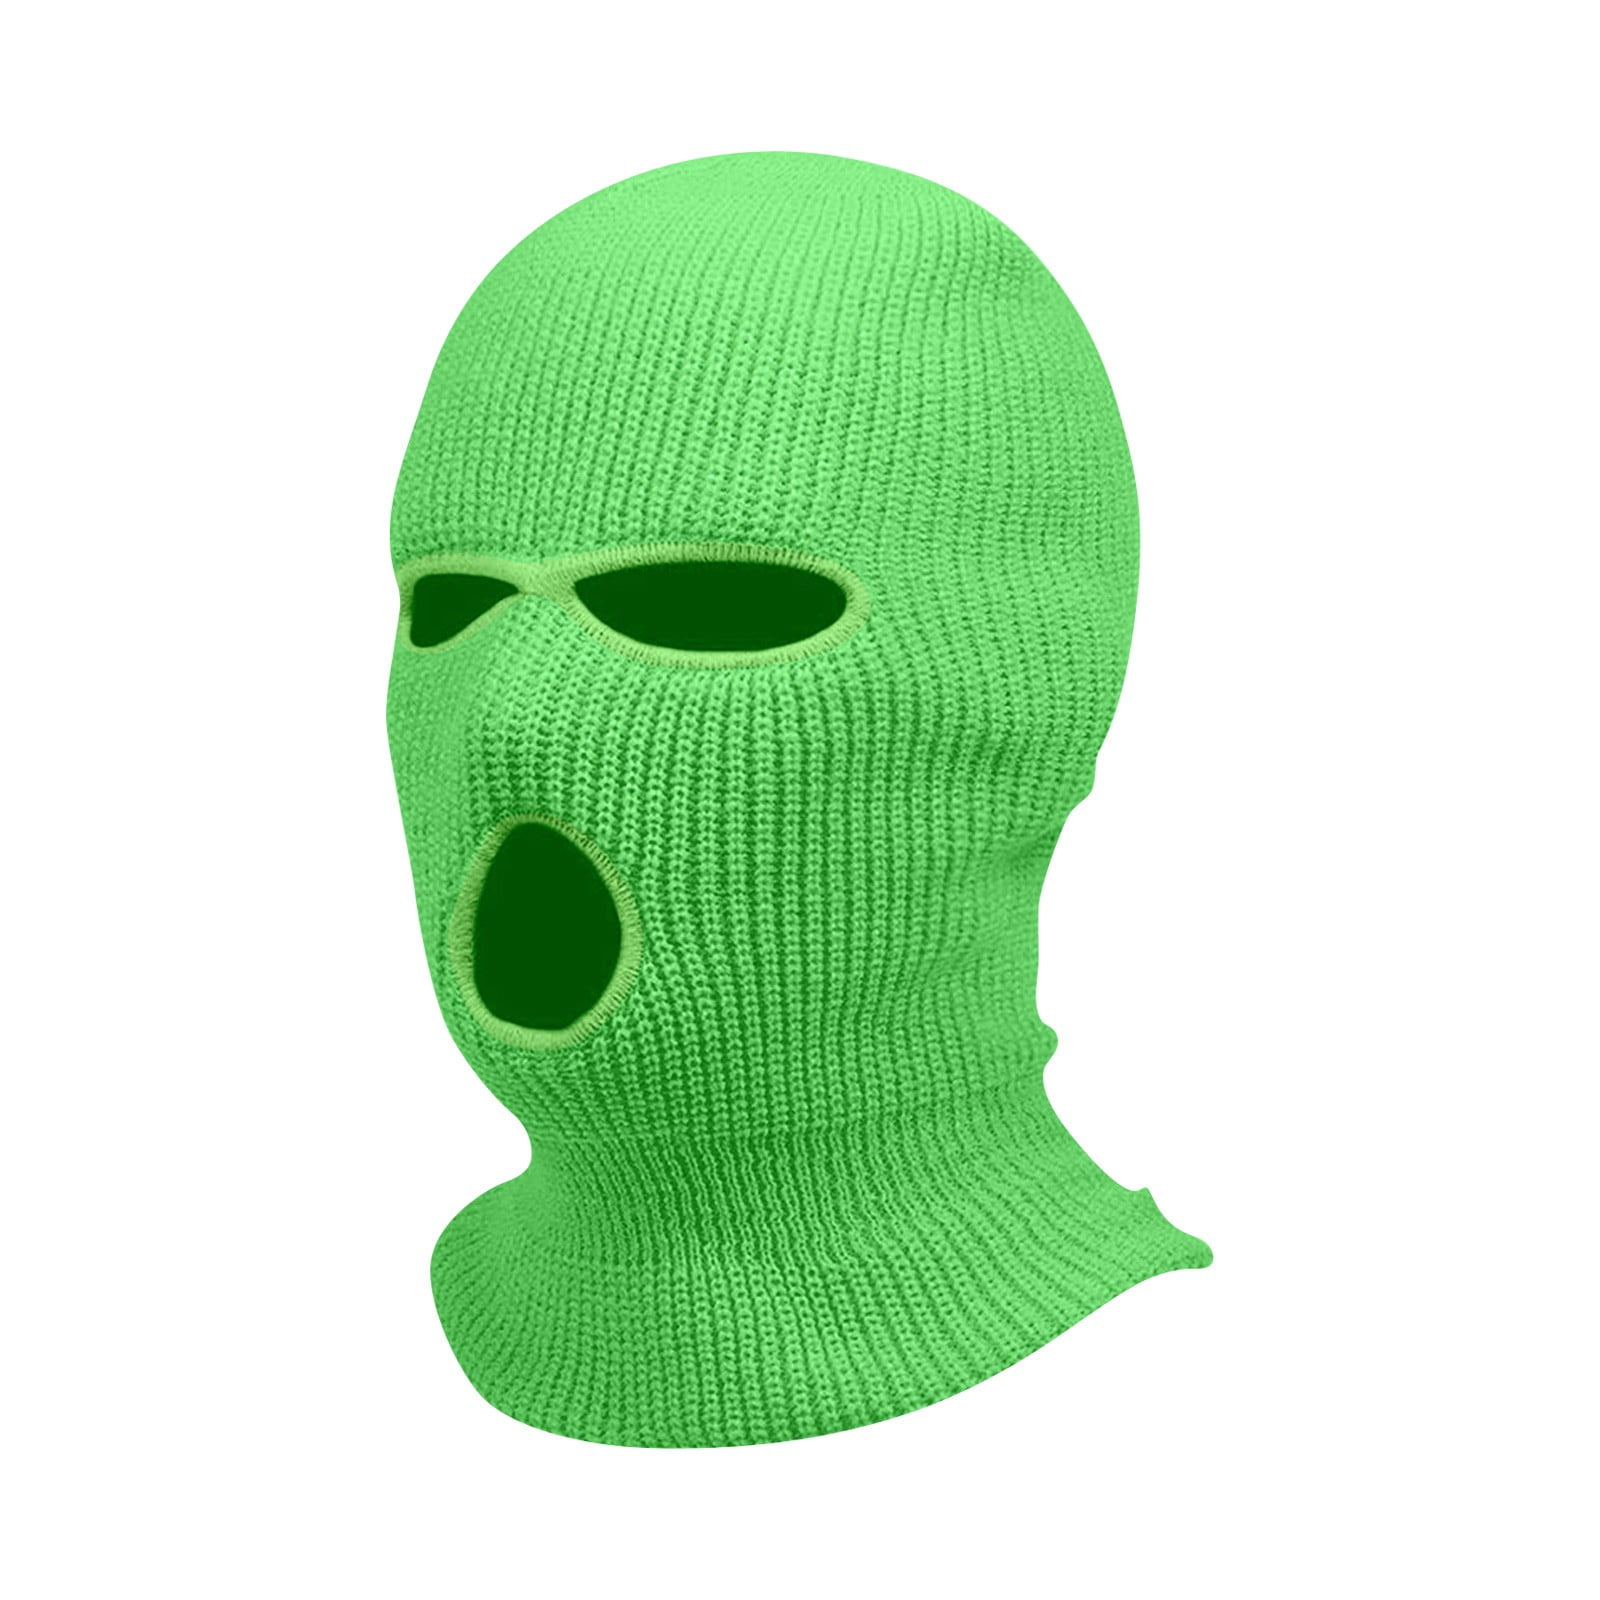 3 Hole Knitted Full Face Ski Mask Winter Balaclava Face Cover for ...